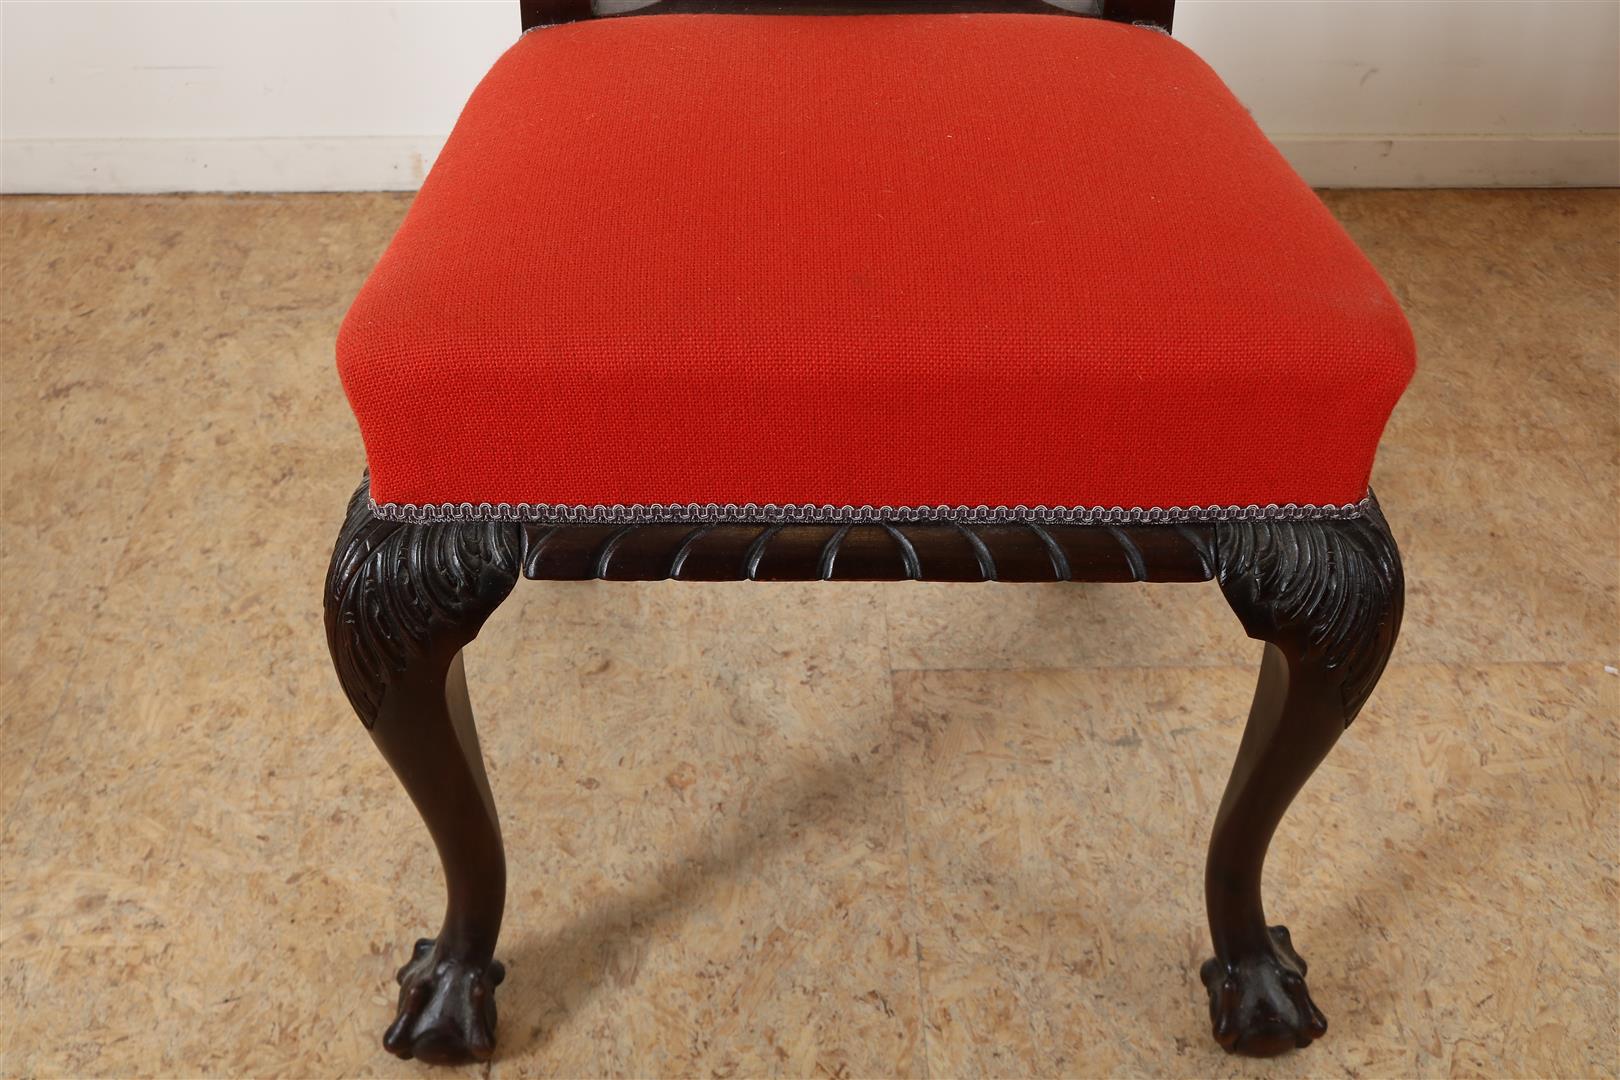 Series of 4 Chippendale-style chairs with elaborate backrest, red fabric seat on ball claw feet, - Image 3 of 4